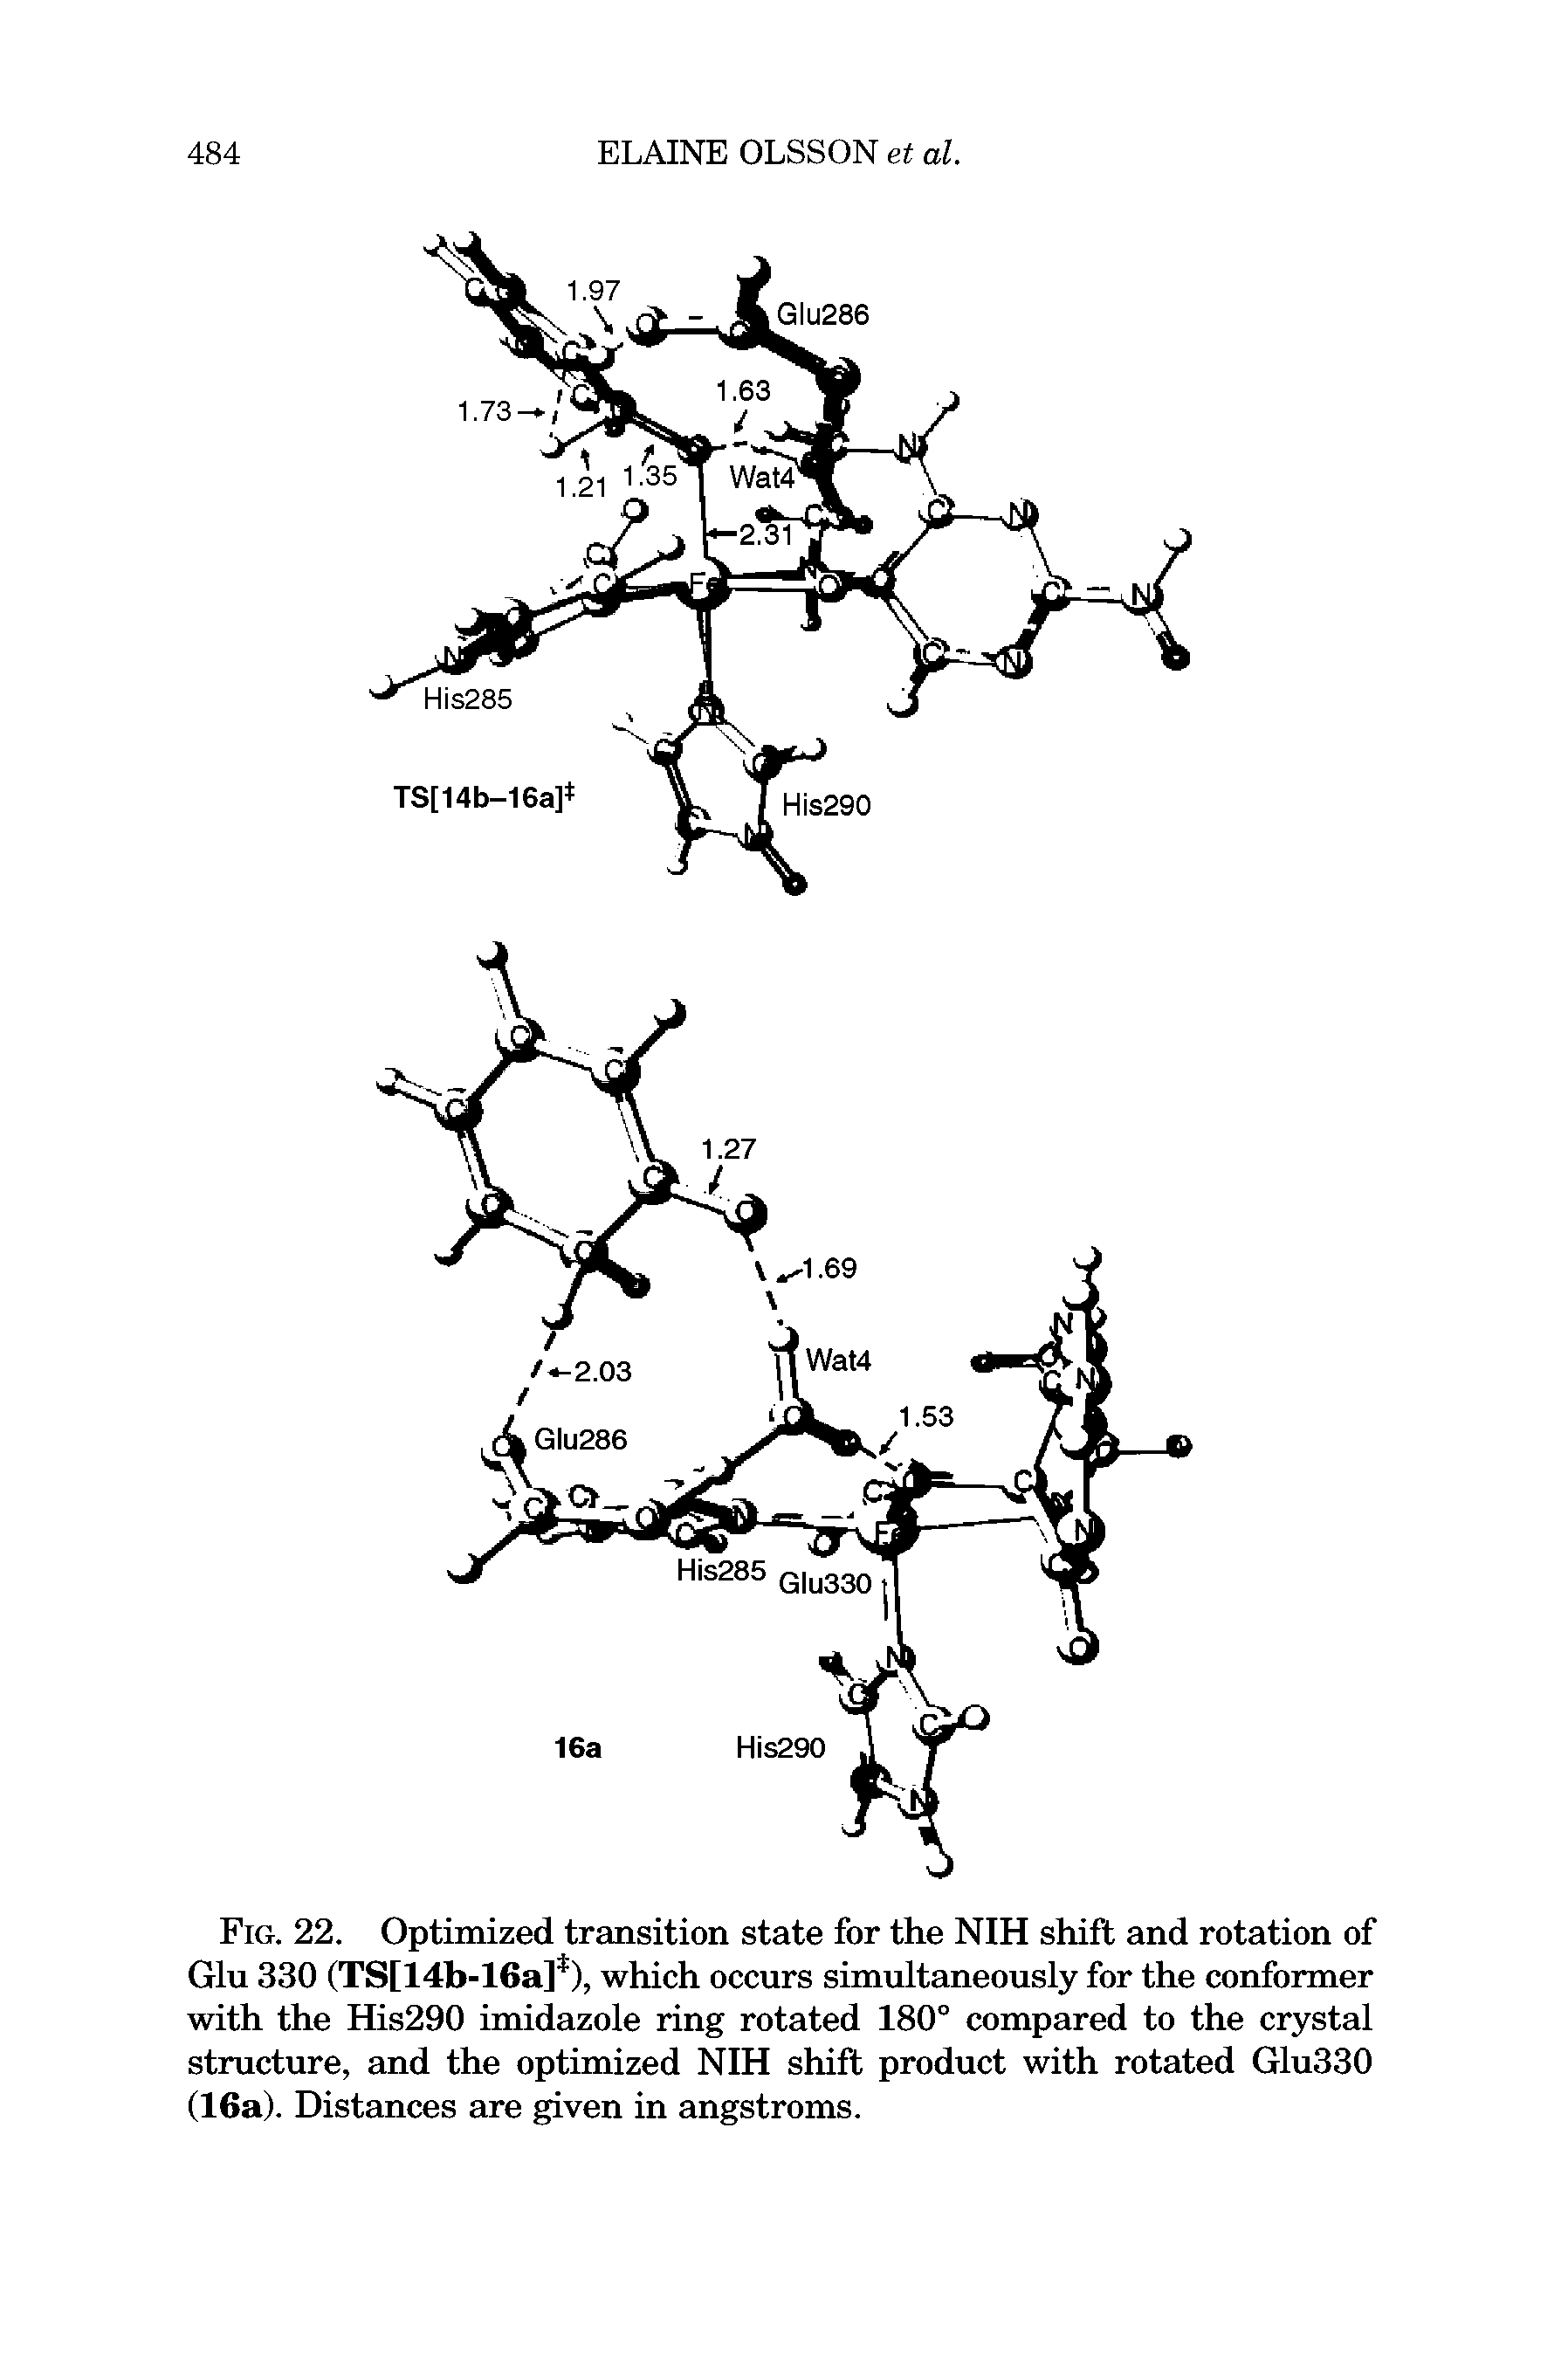 Fig. 22. Optimized transition state for the NIH shift and rotation of Glu 330 (TS[14b-16a] ), which occurs simultaneously for the conformer with the His290 imidazole ring rotated 180° compared to the crystal structure, and the optimized NIH shift product with rotated Glu330 (16a). Distances are given in angstroms.